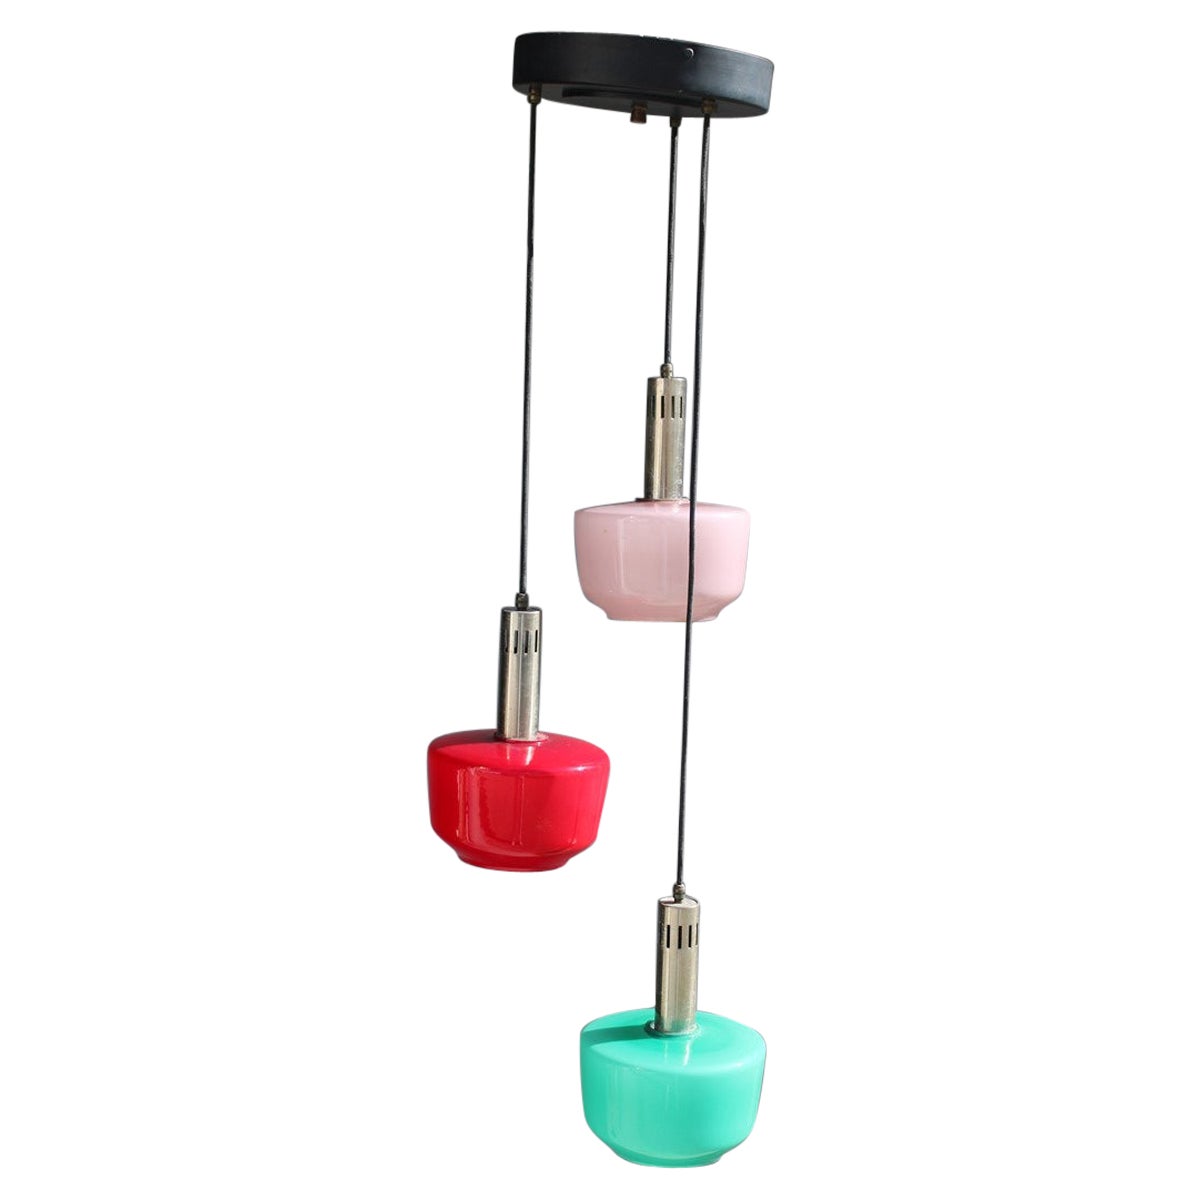 Cascade Chandelier Ceiling Lamp Vistosi Red Green Pink 1950s Mid-century Italy For Sale